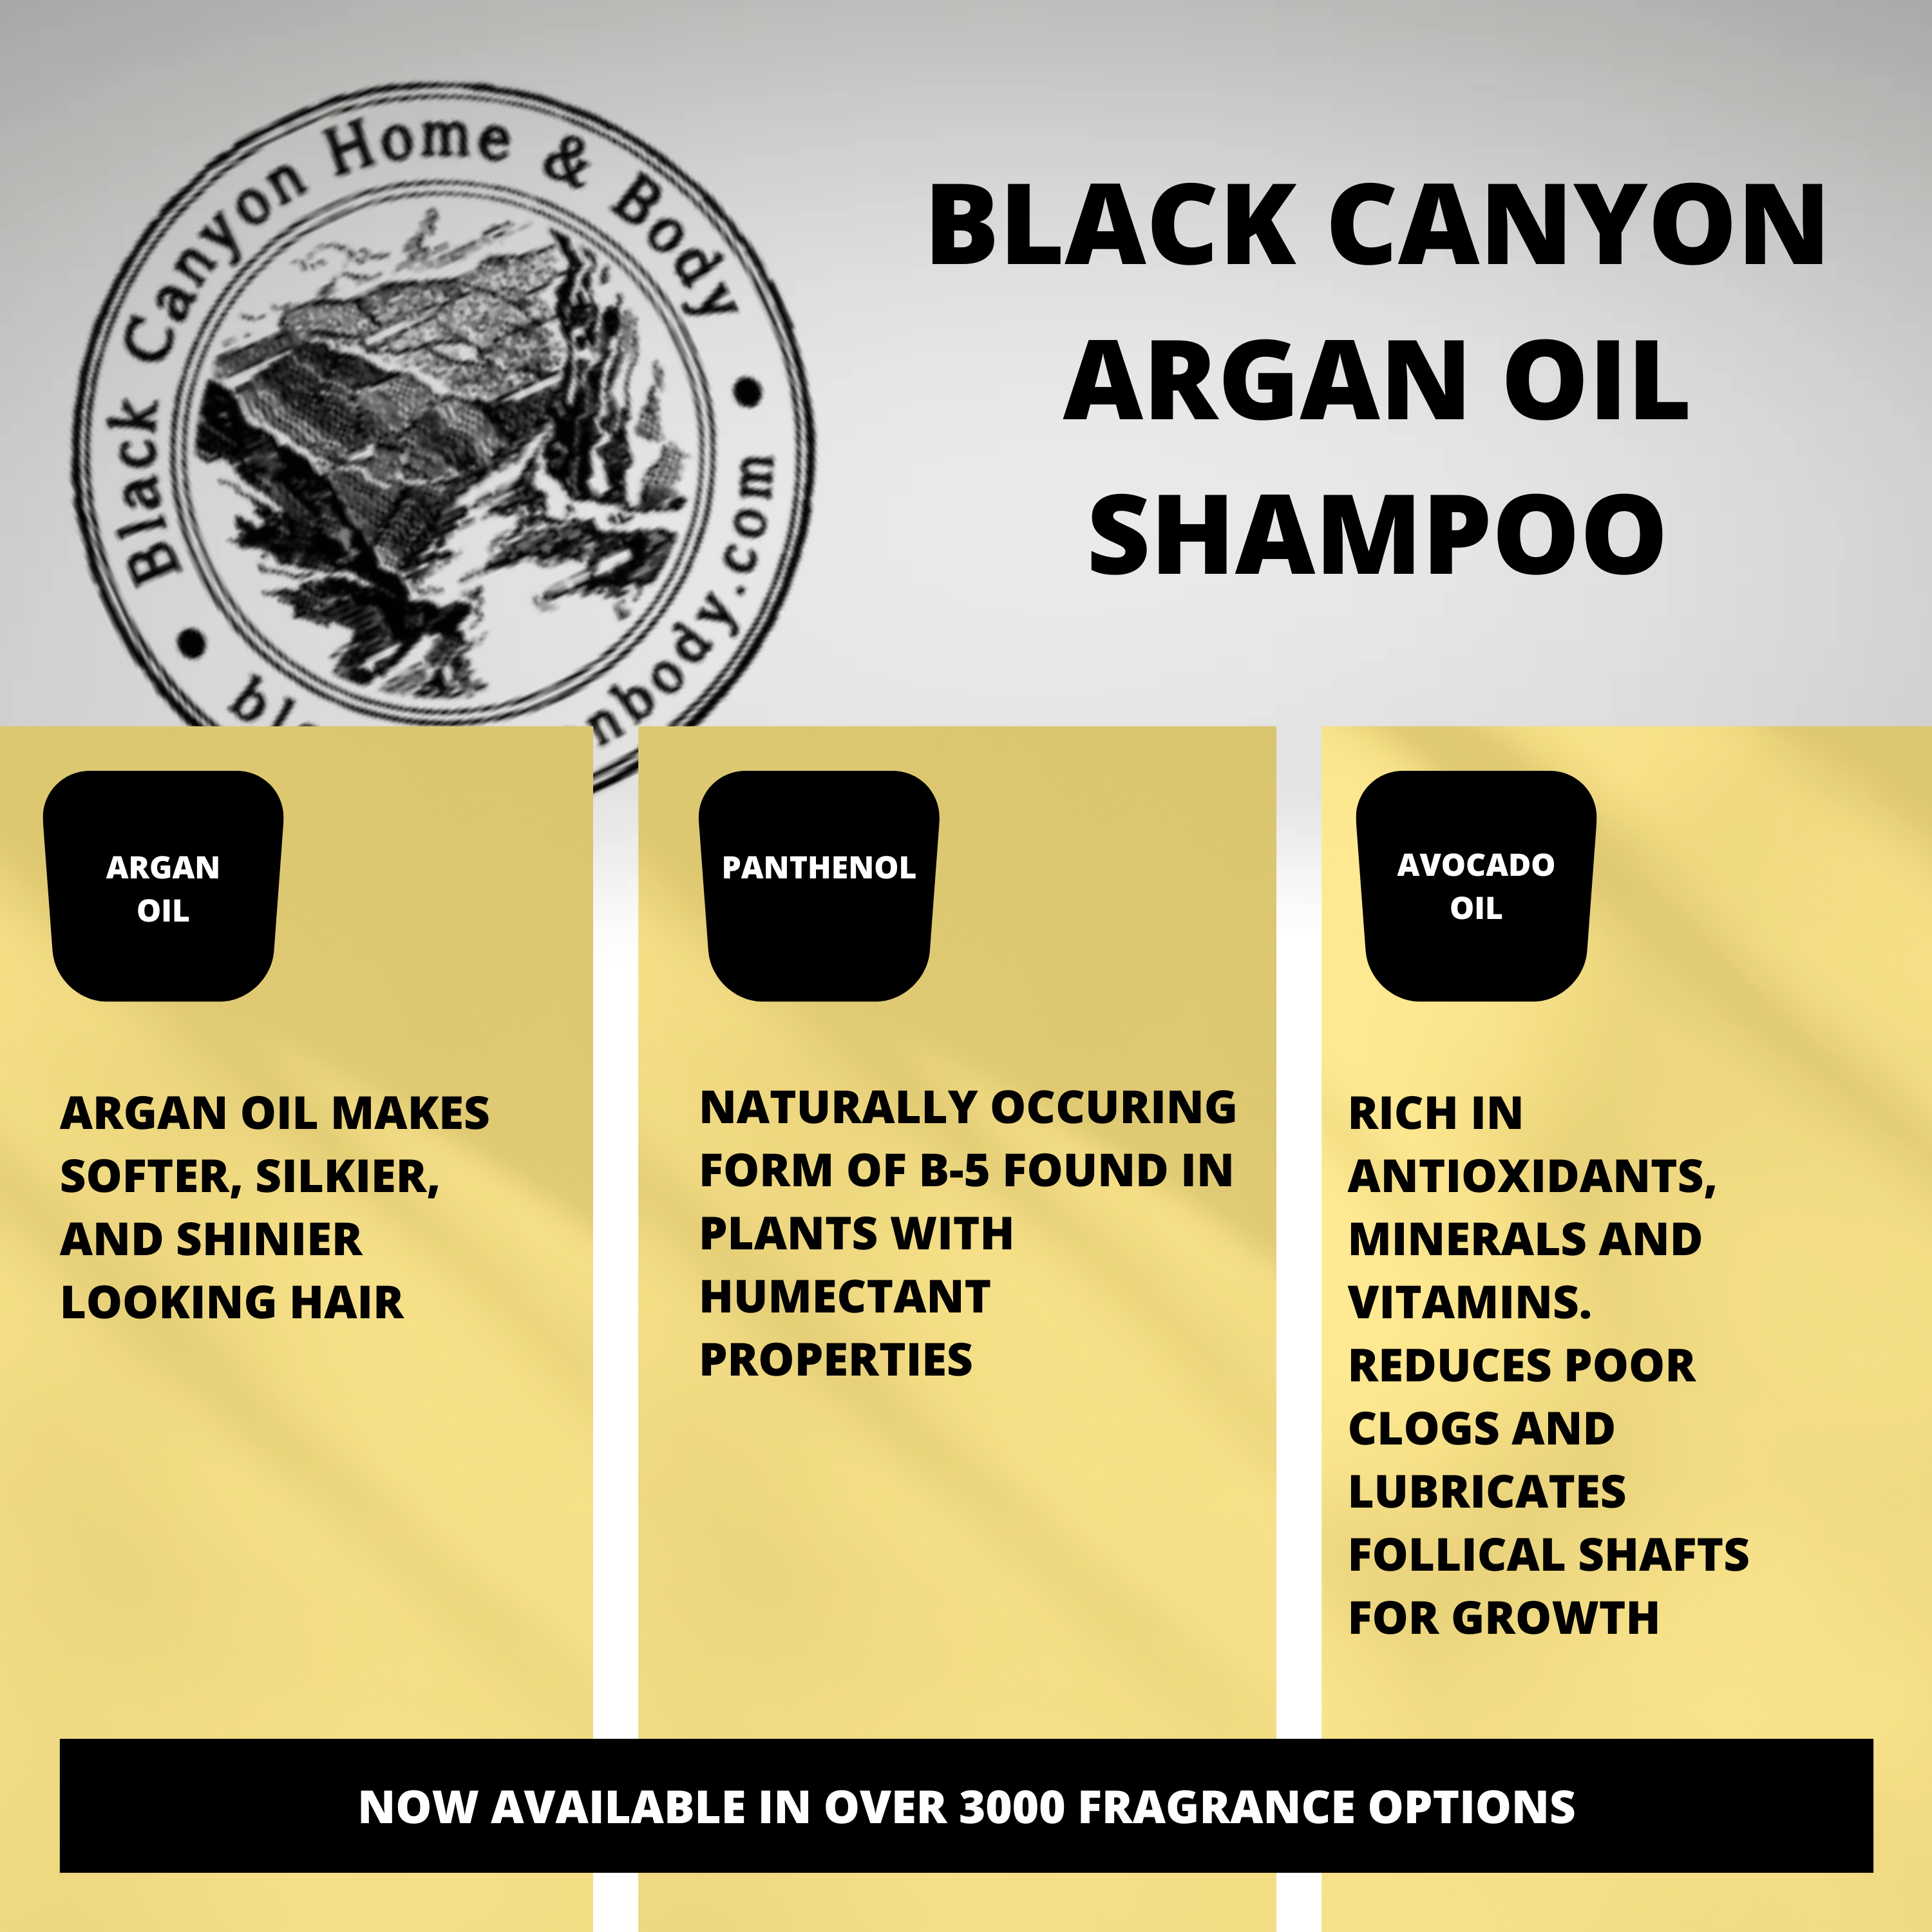 Black Canyon Chocolate Decadence Scented Shampoo with Argan Oil